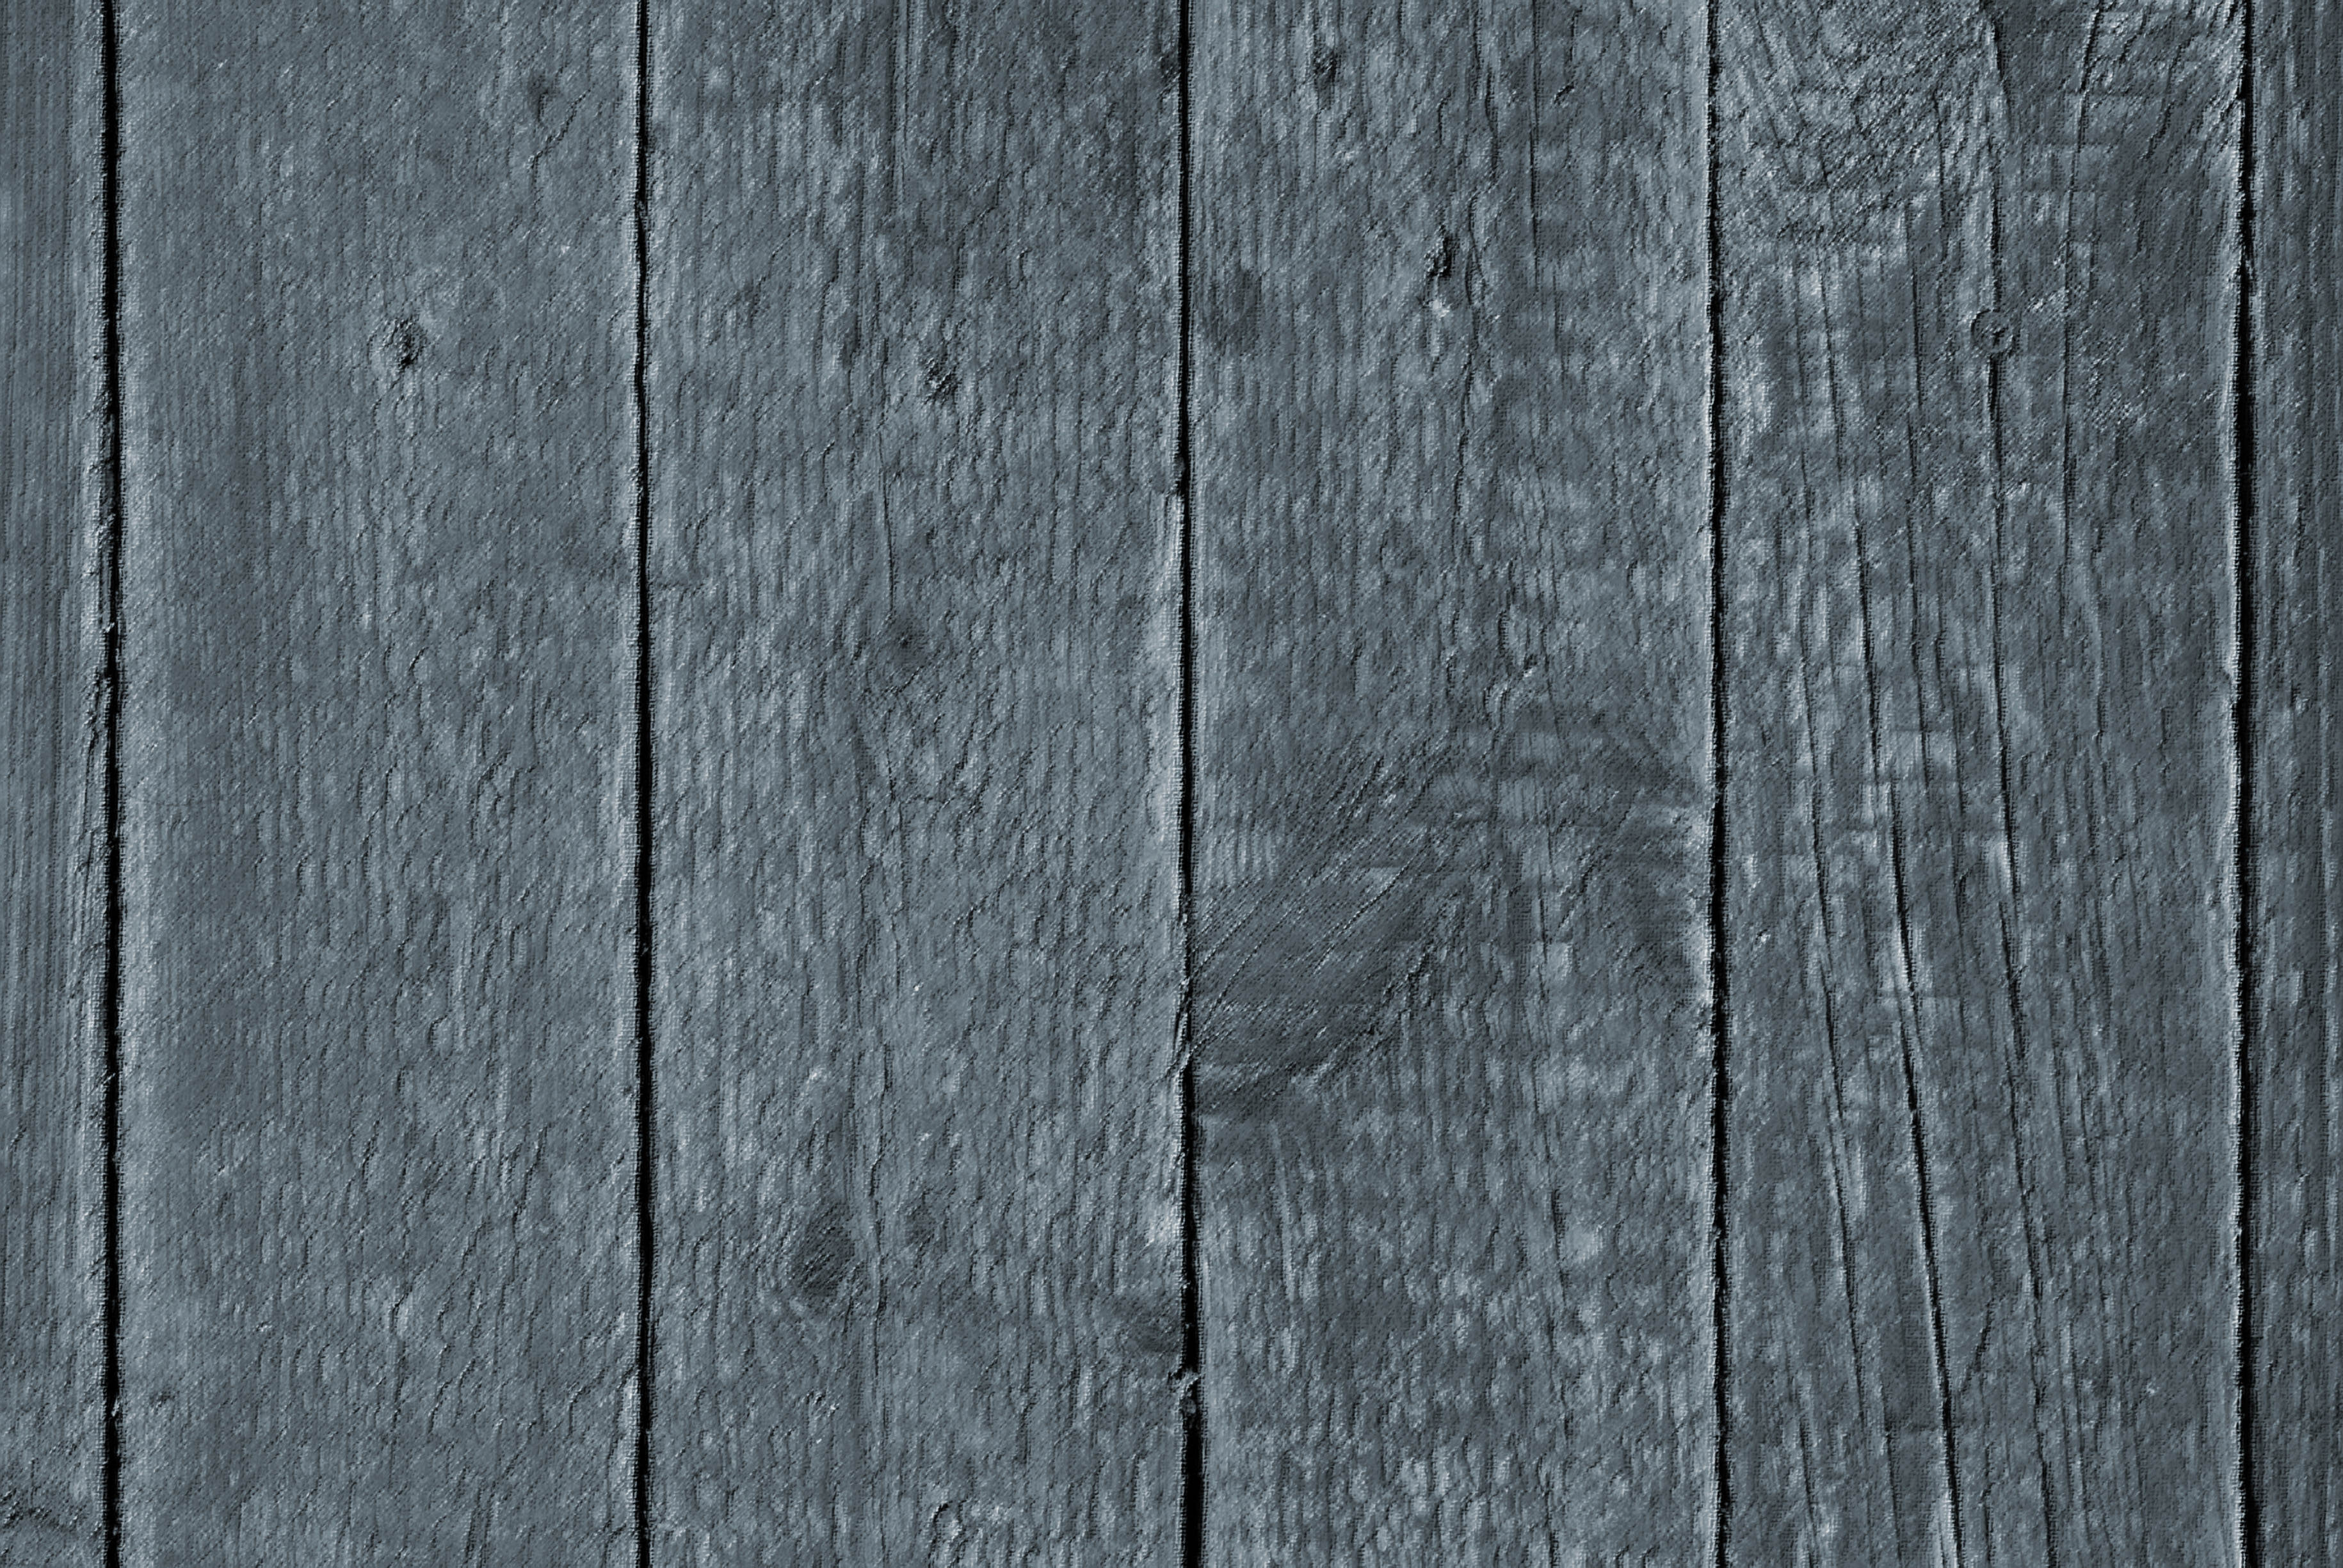 Rough Wood Plank Texture